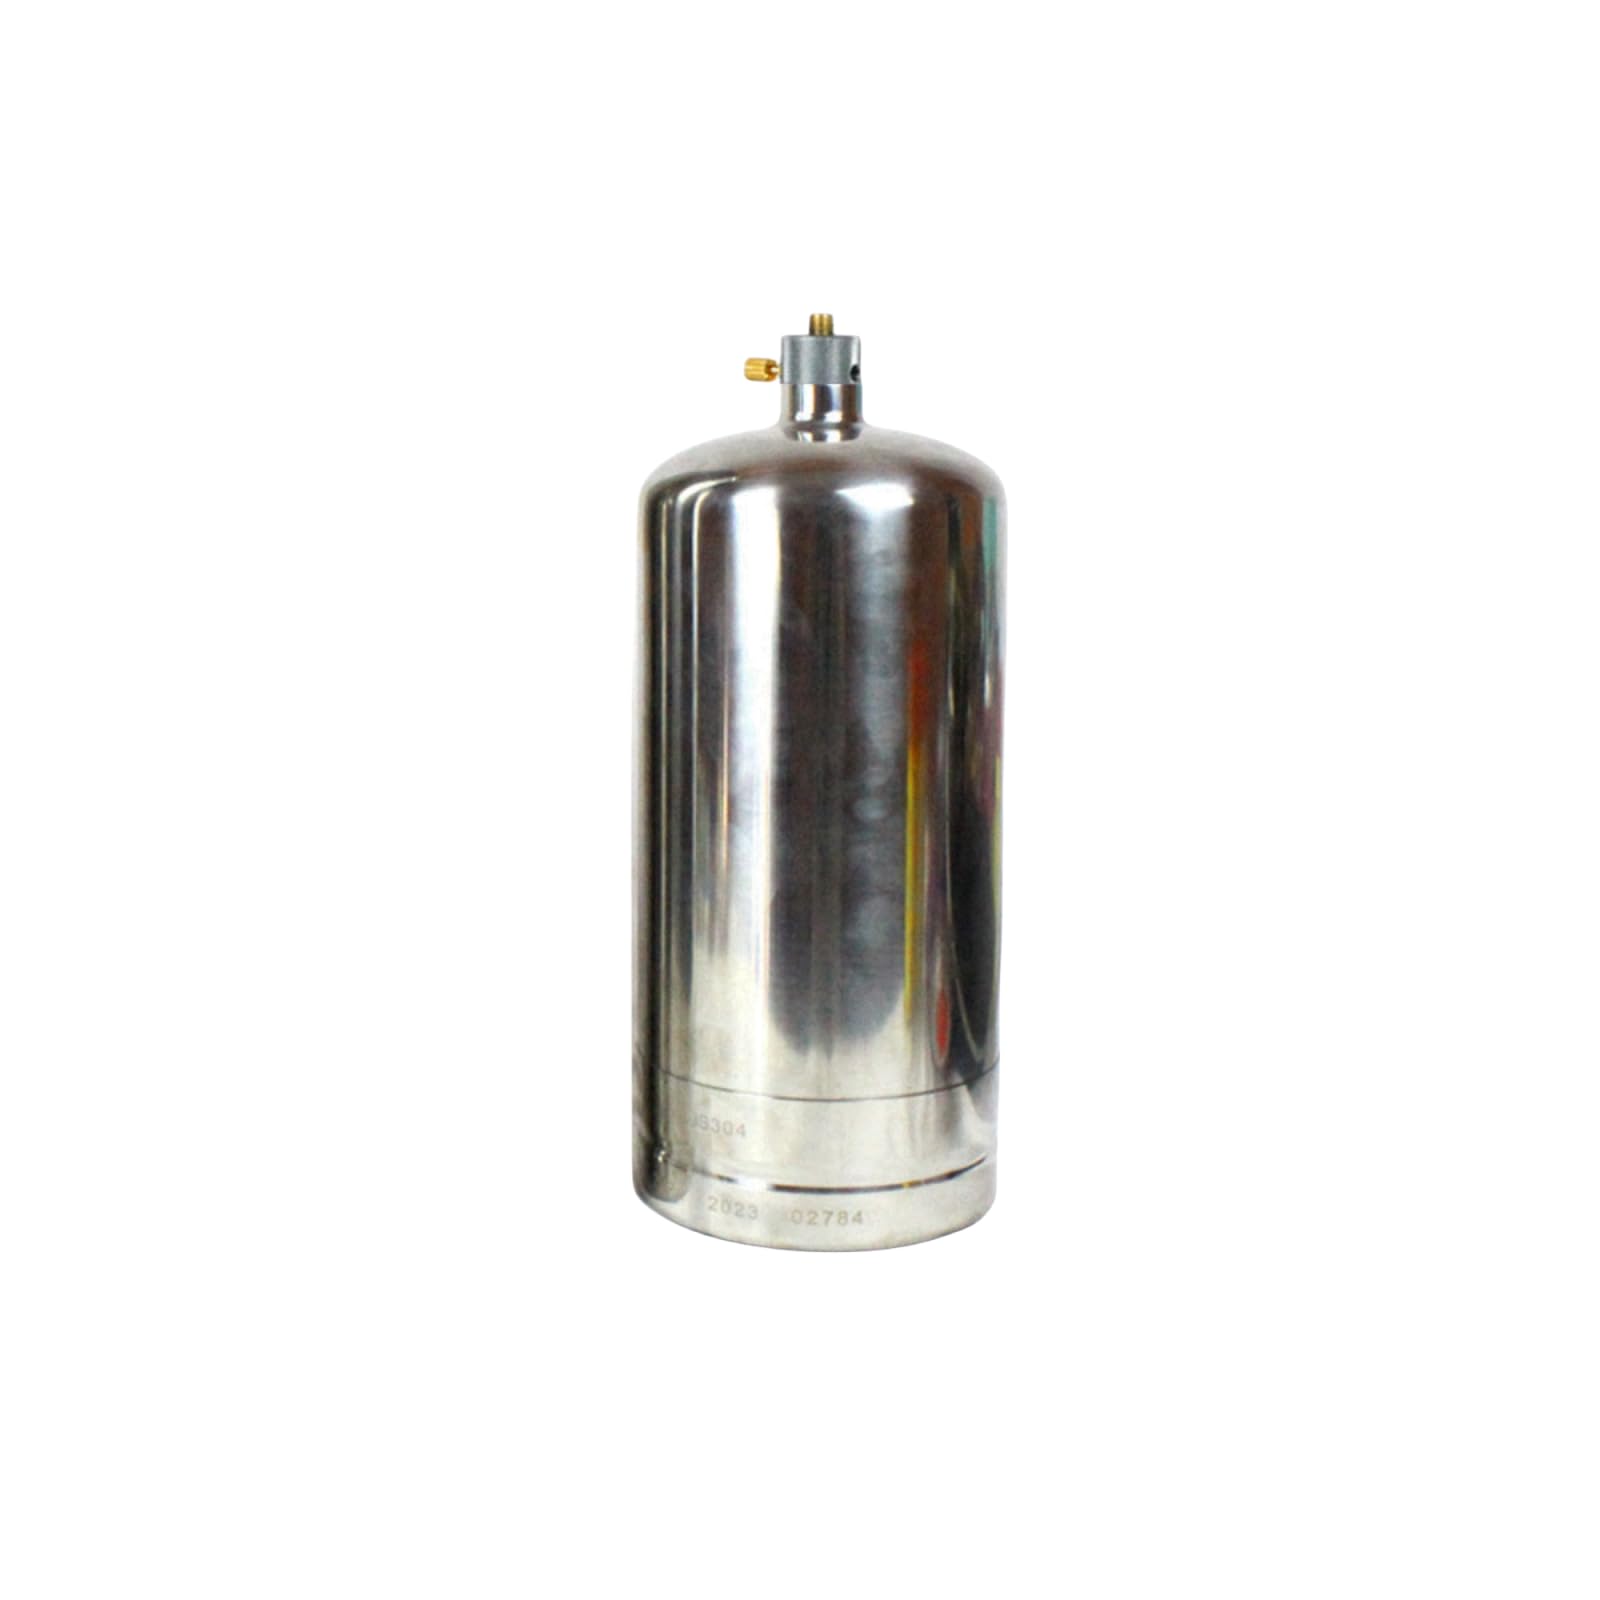 Outdoor Camping Equipment Portable 304 Stainless steel Cookware Pressure tank refillable Propane Gas cylinder - with filling